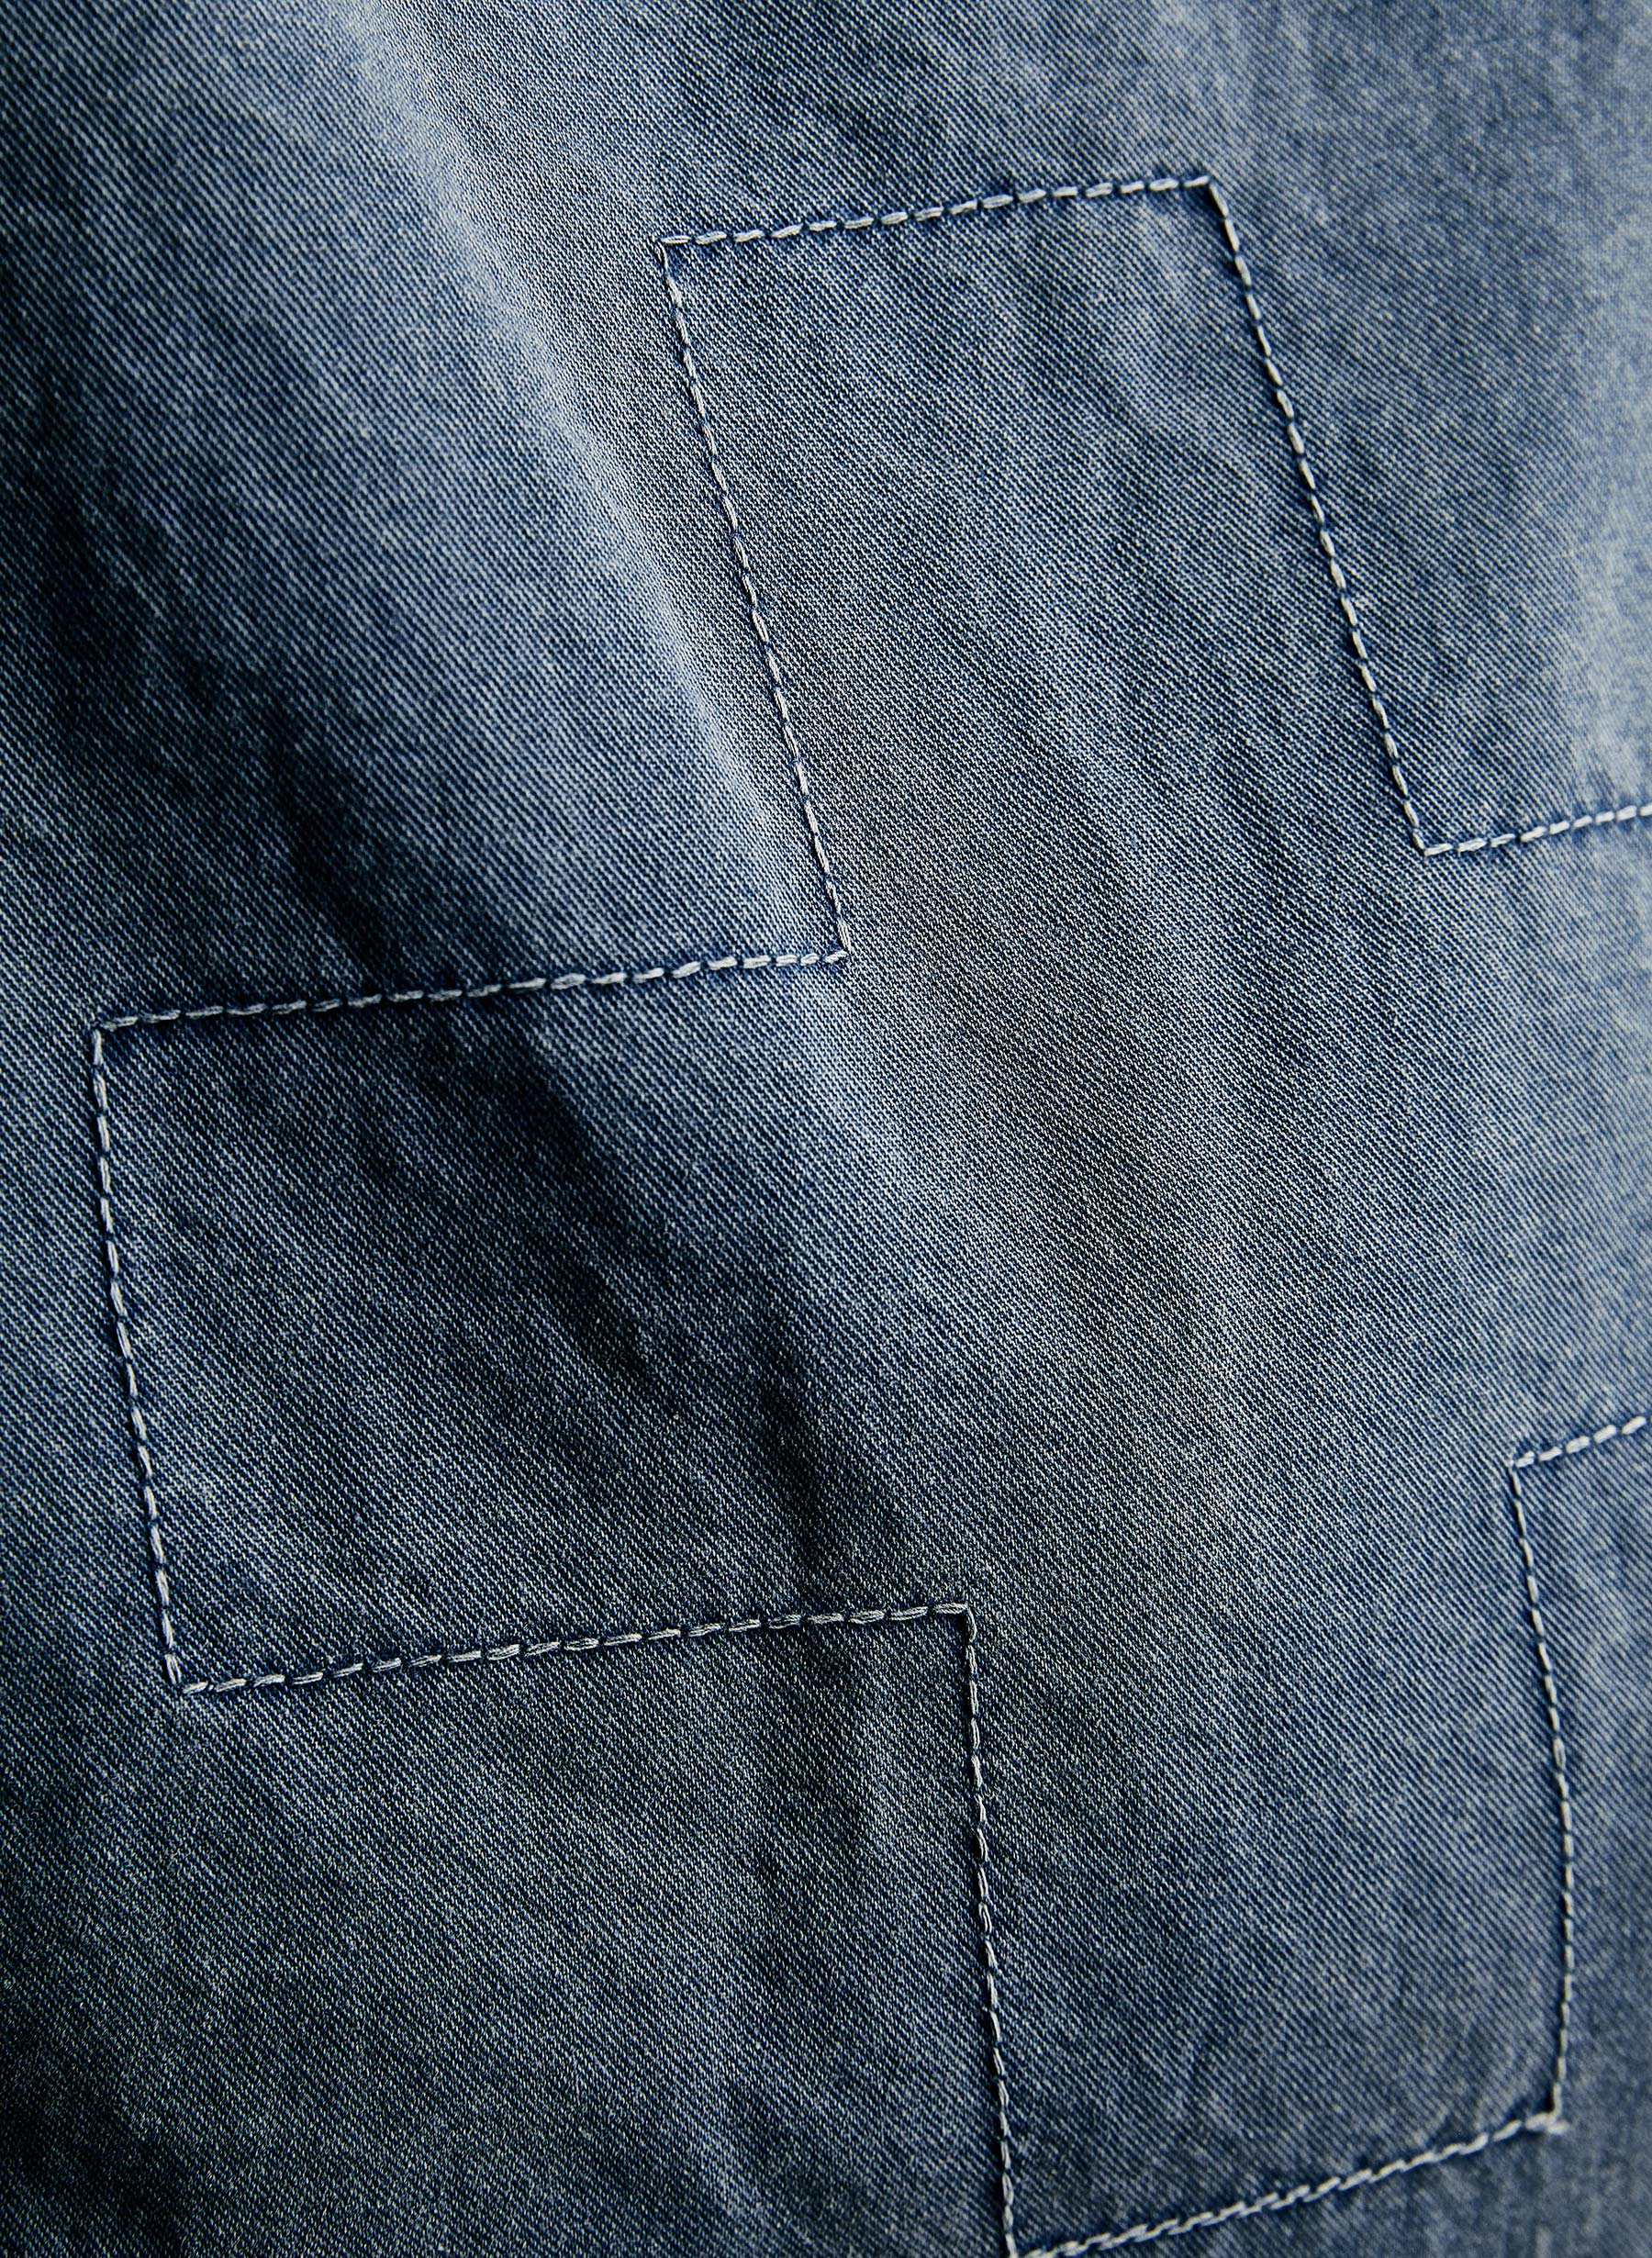 Outerwear, Sleeve, Textile, Grey, Denim, Electric blue, Natural material, Pattern, Composite material, Pocket